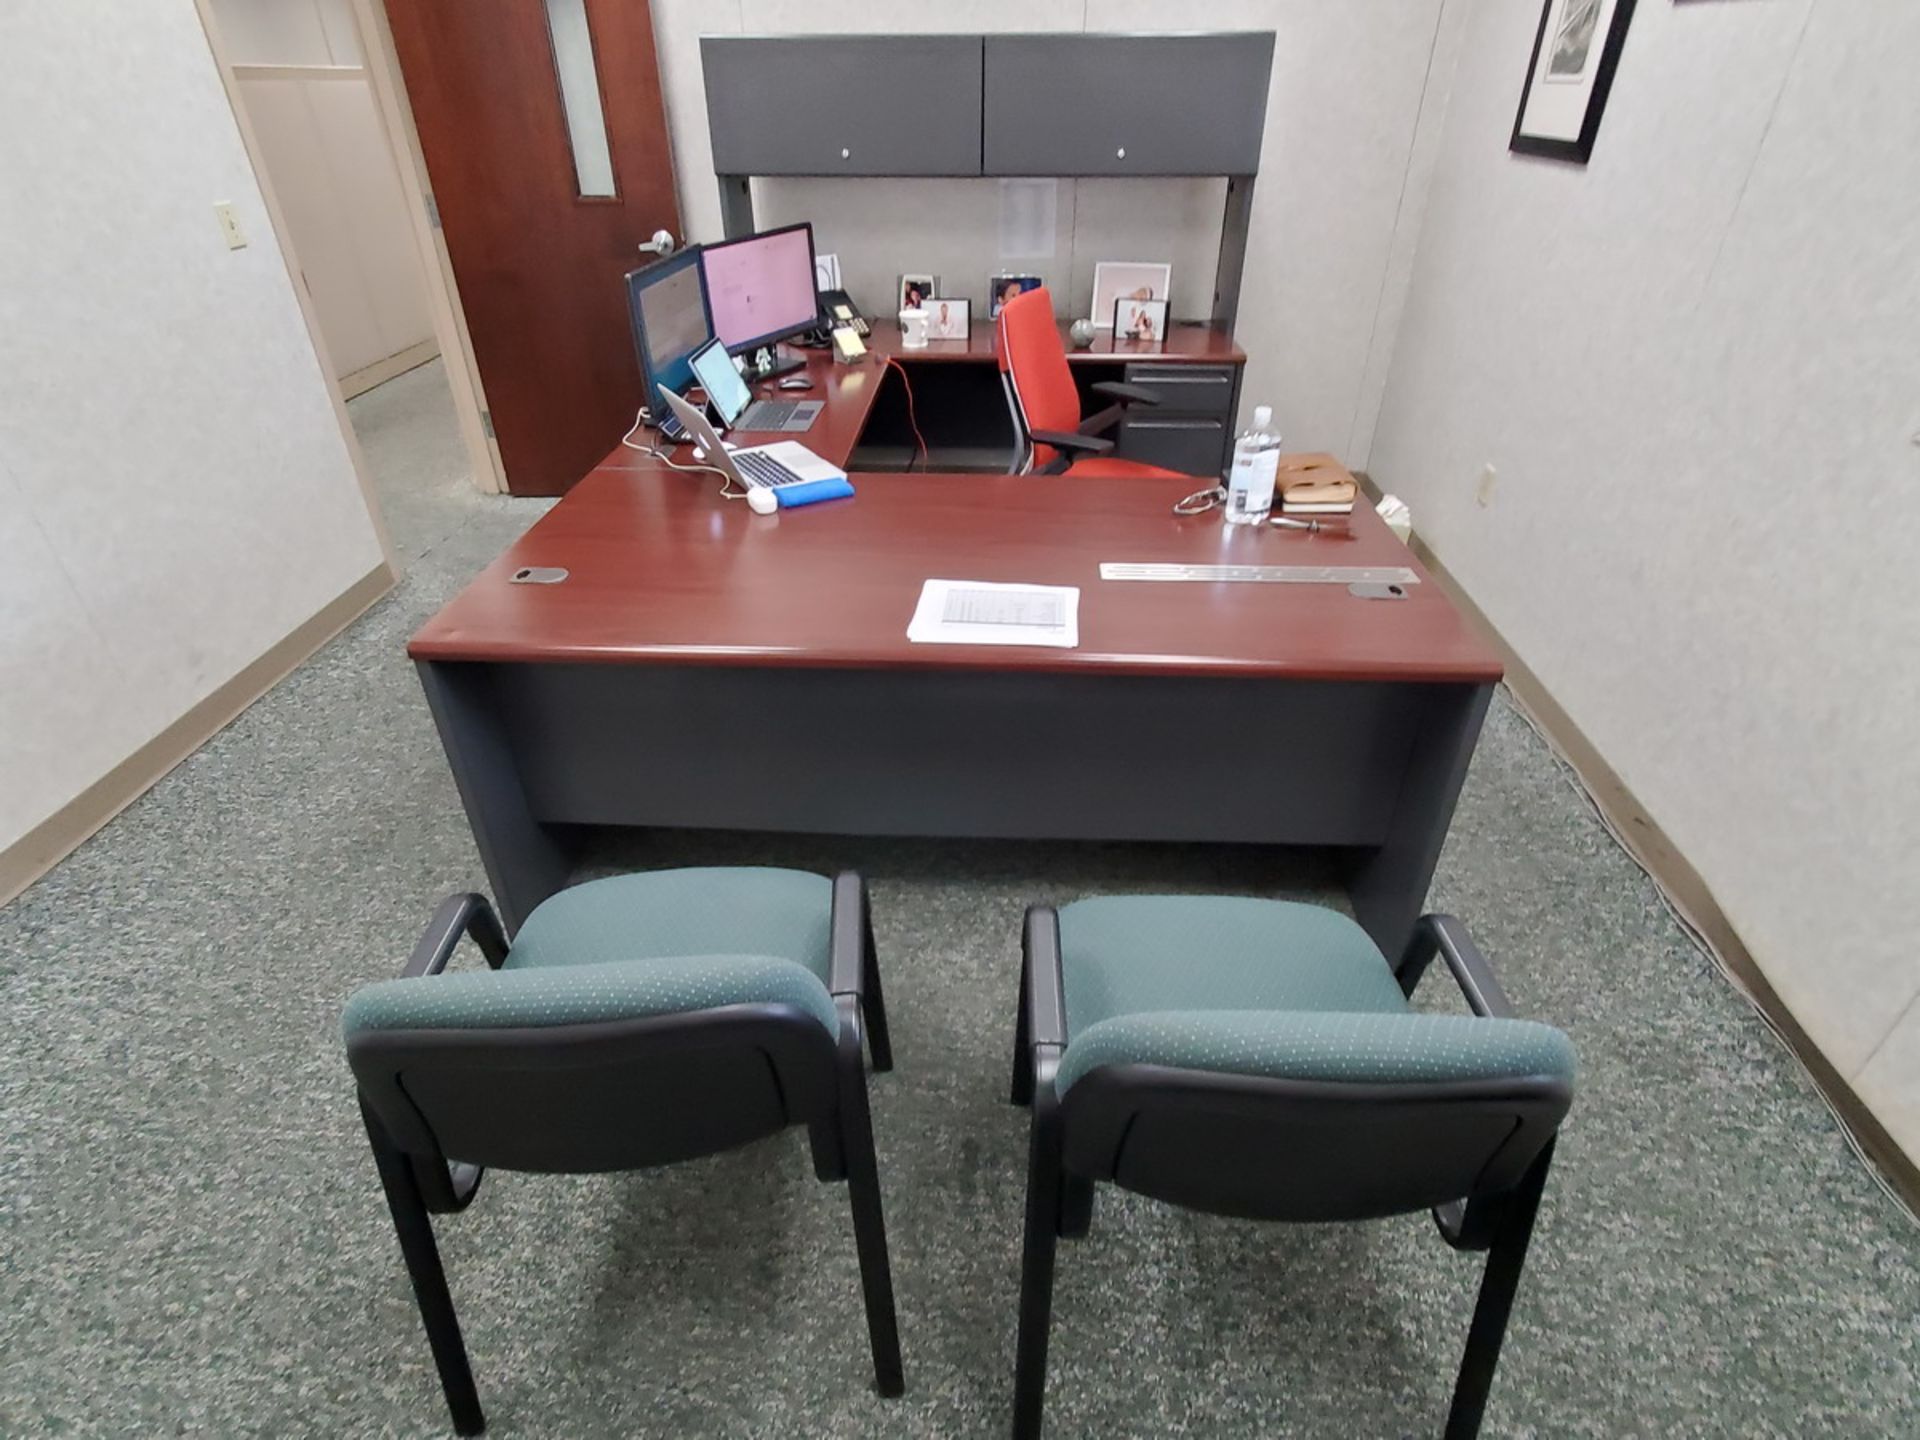 Office Furniture (1) U-Shape Wood Desk, W/ 4-Drawers; (2) Chairs (Red Executive Chair Excluded) - Image 4 of 4